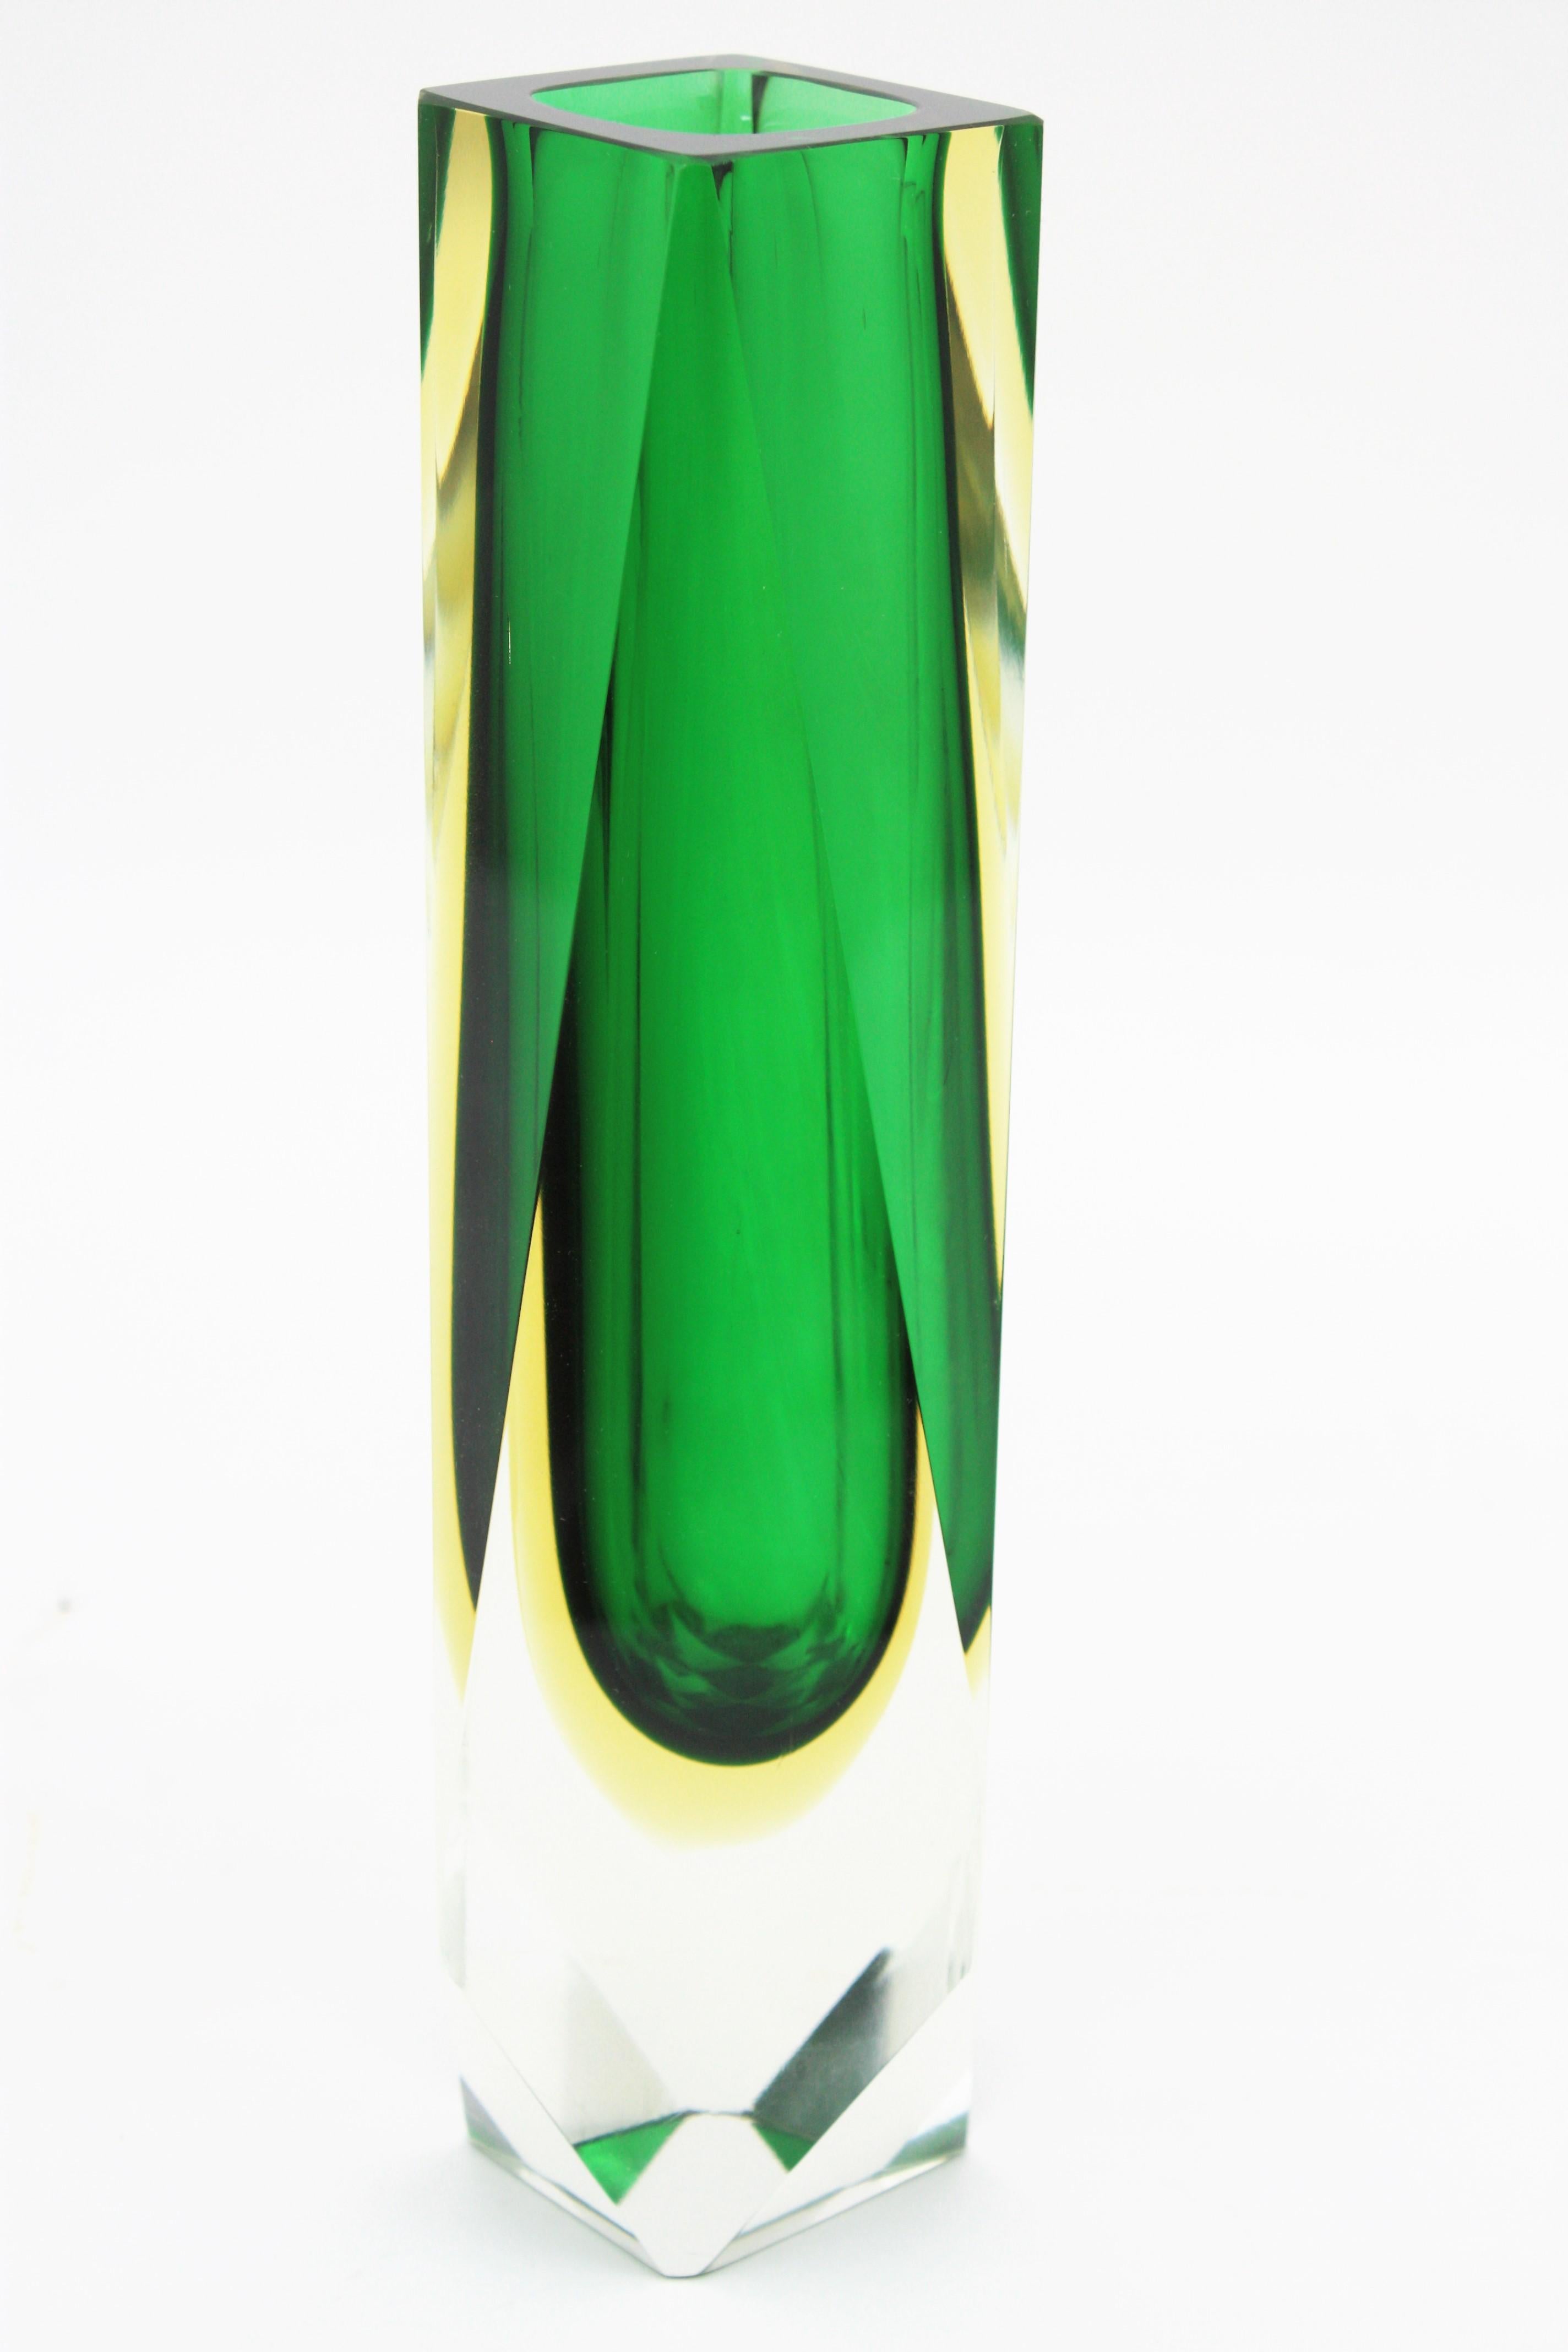 20th Century Extra Large Mandruzzato Murano Sommerso Green Black Yellow Faceted Glass Vase